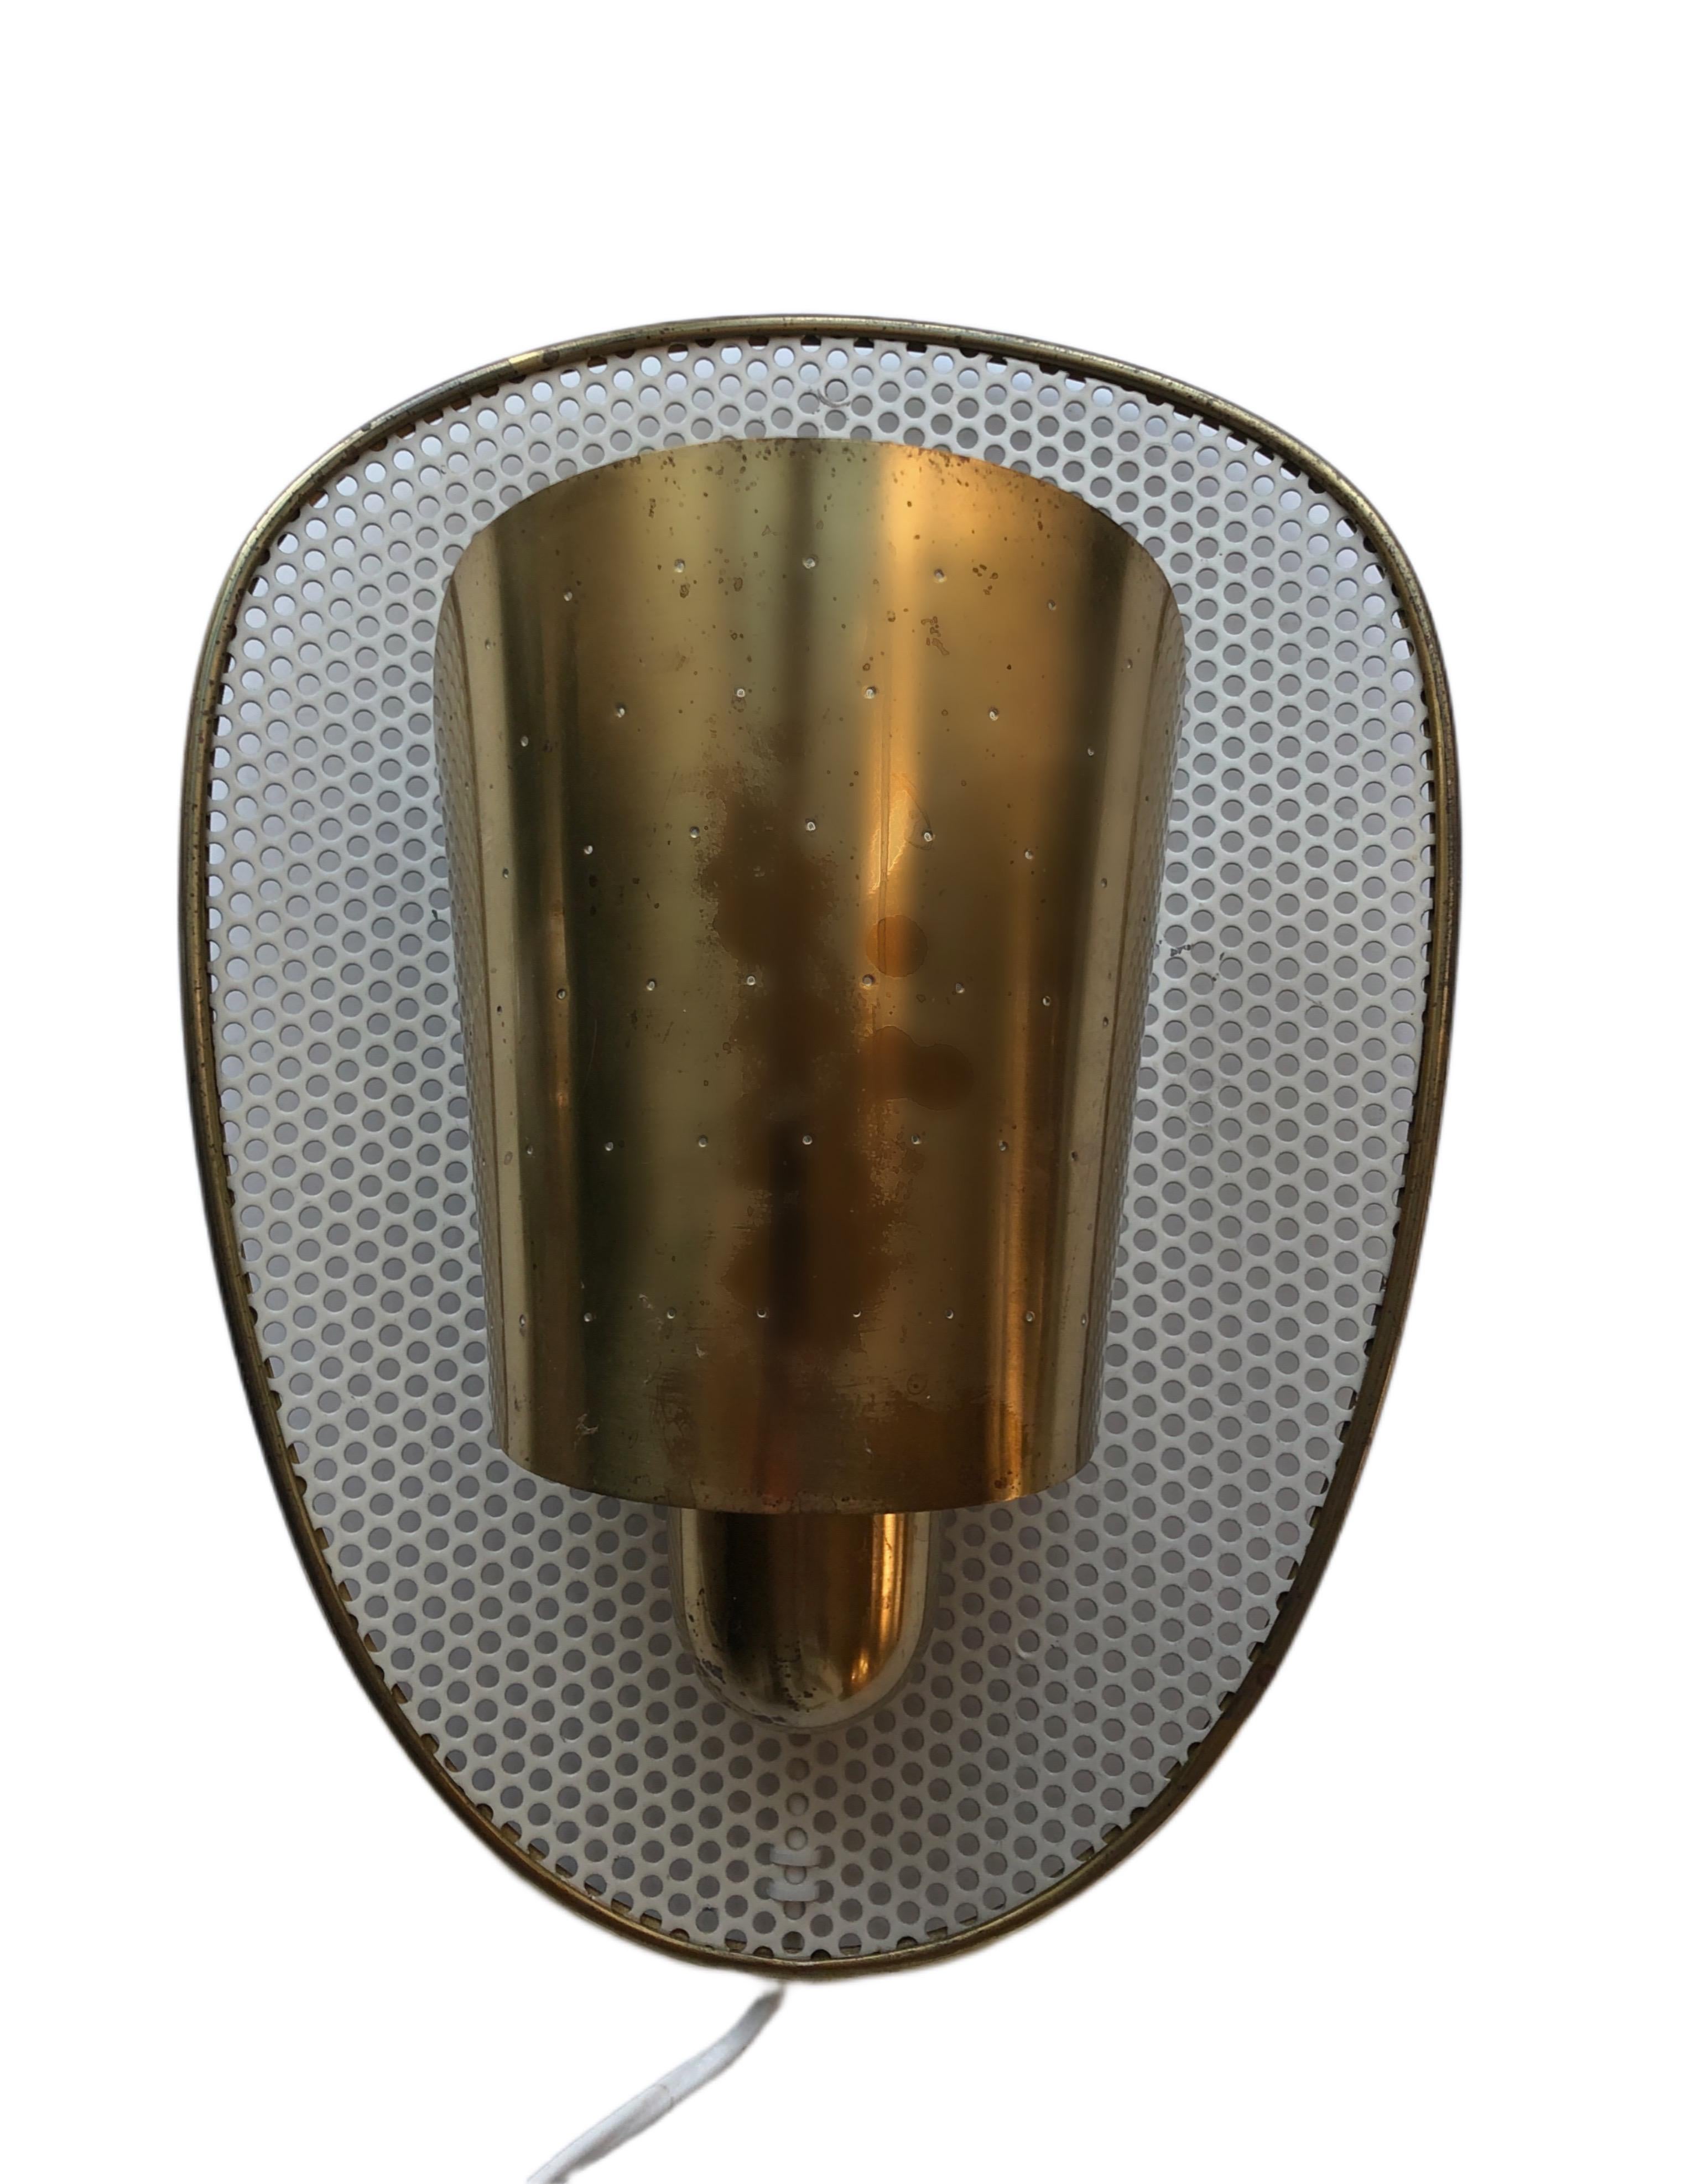 Single sconce attributed to Jacques Biny. Designed and manufactured in France, circa the 1950s. Perforated shade in brass. 

Jacques Biny is a major French luminary from the era of the glorious 30’s. Unlike other designers, he is also a publisher